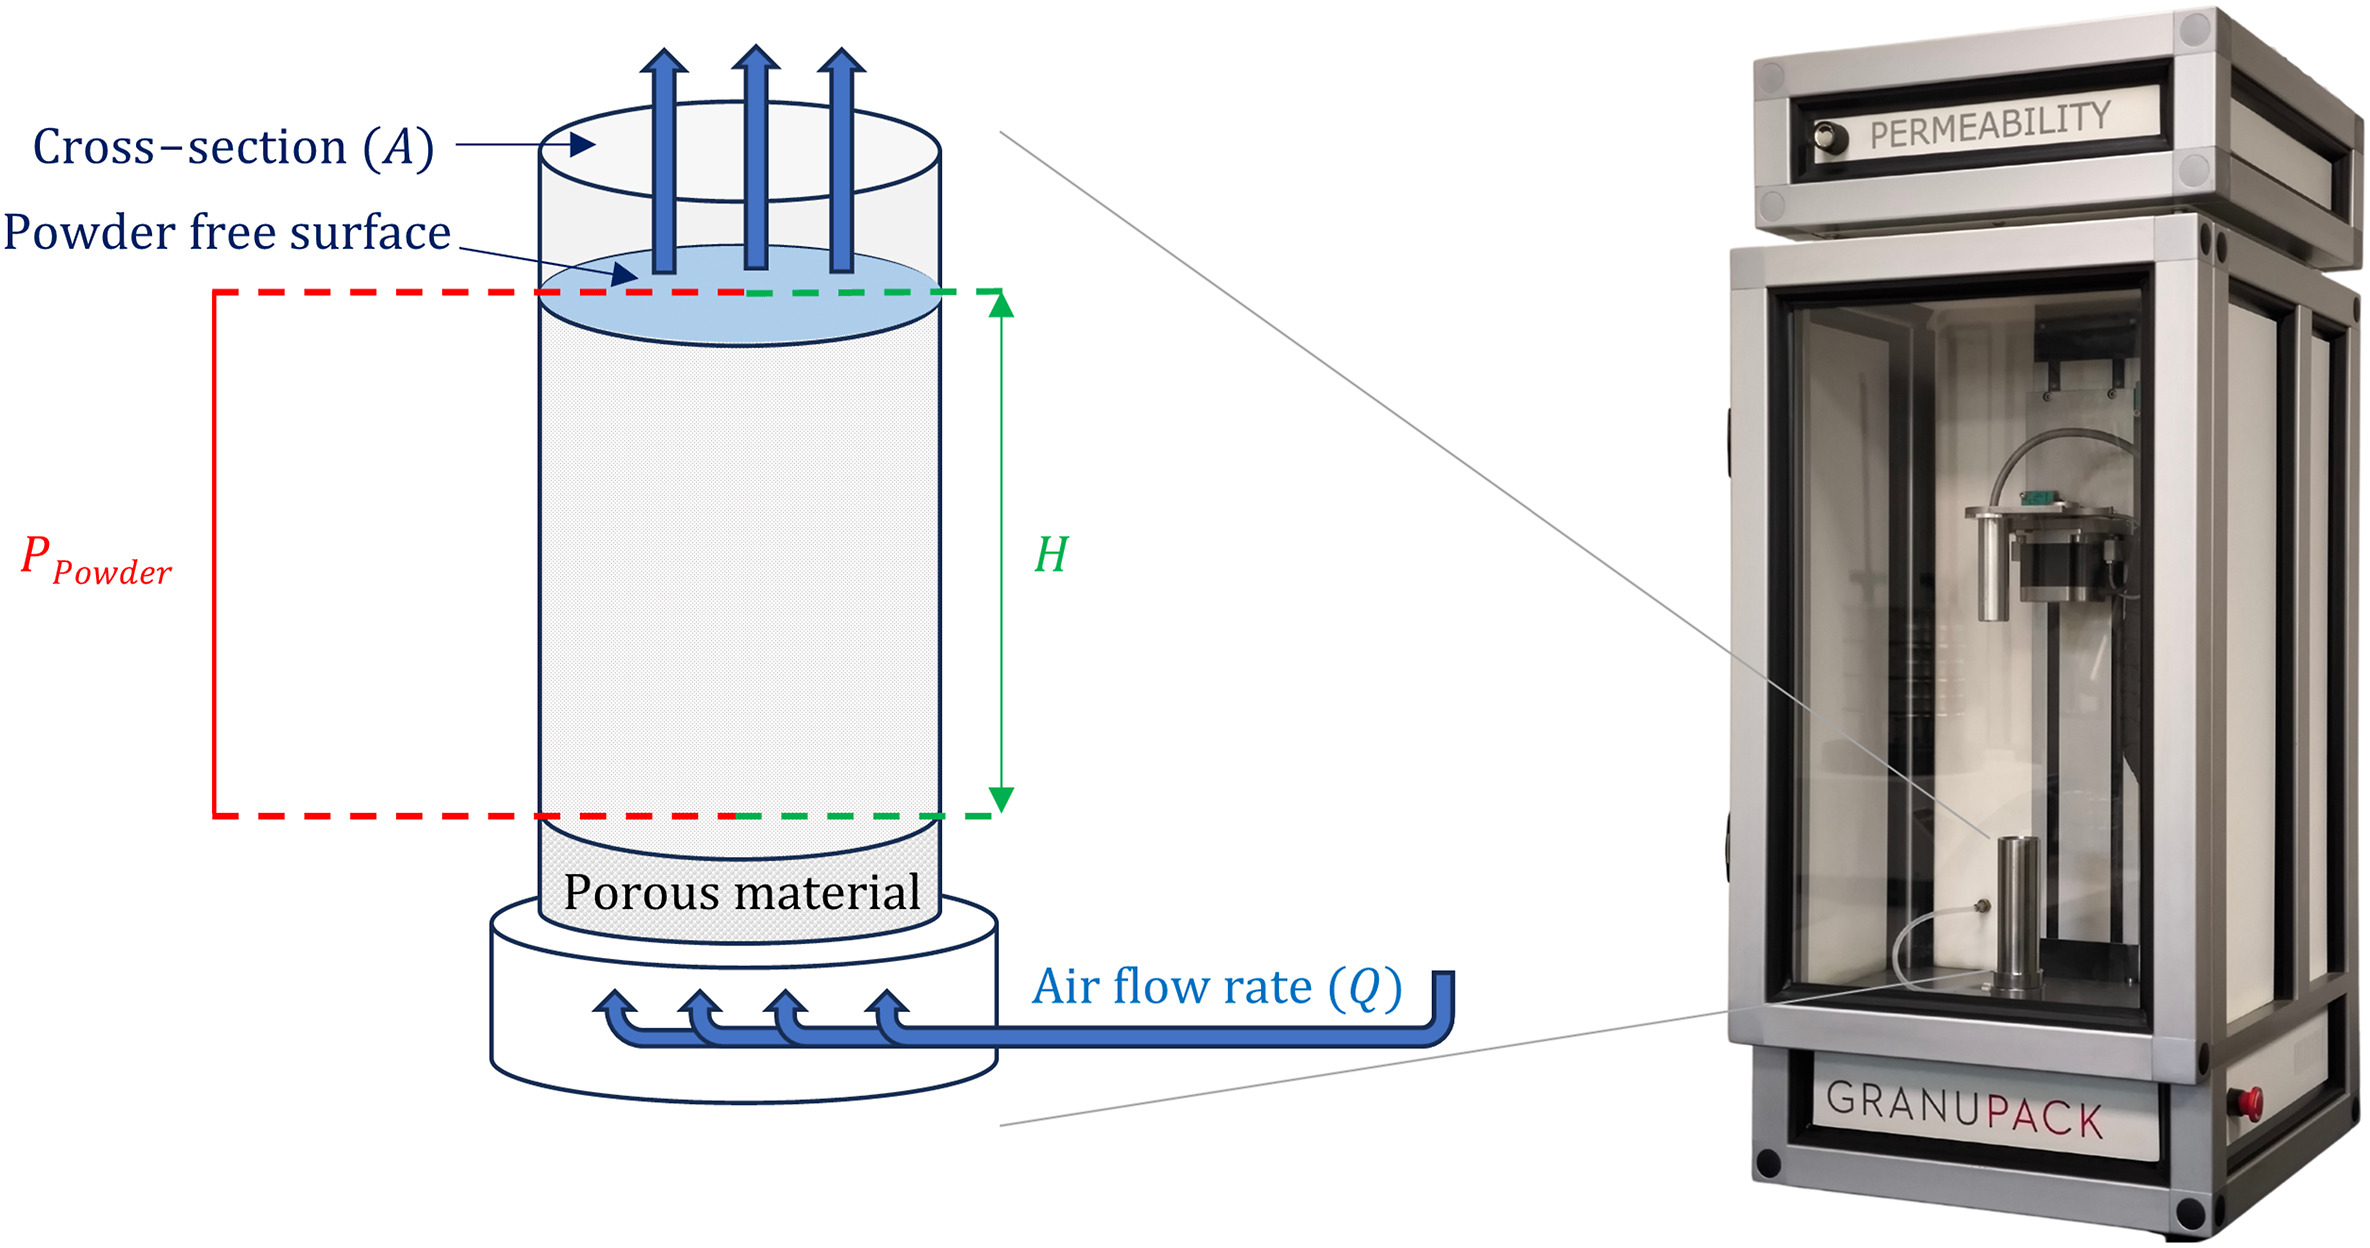 Measuring permeability and flowability of powders at various packing fractions